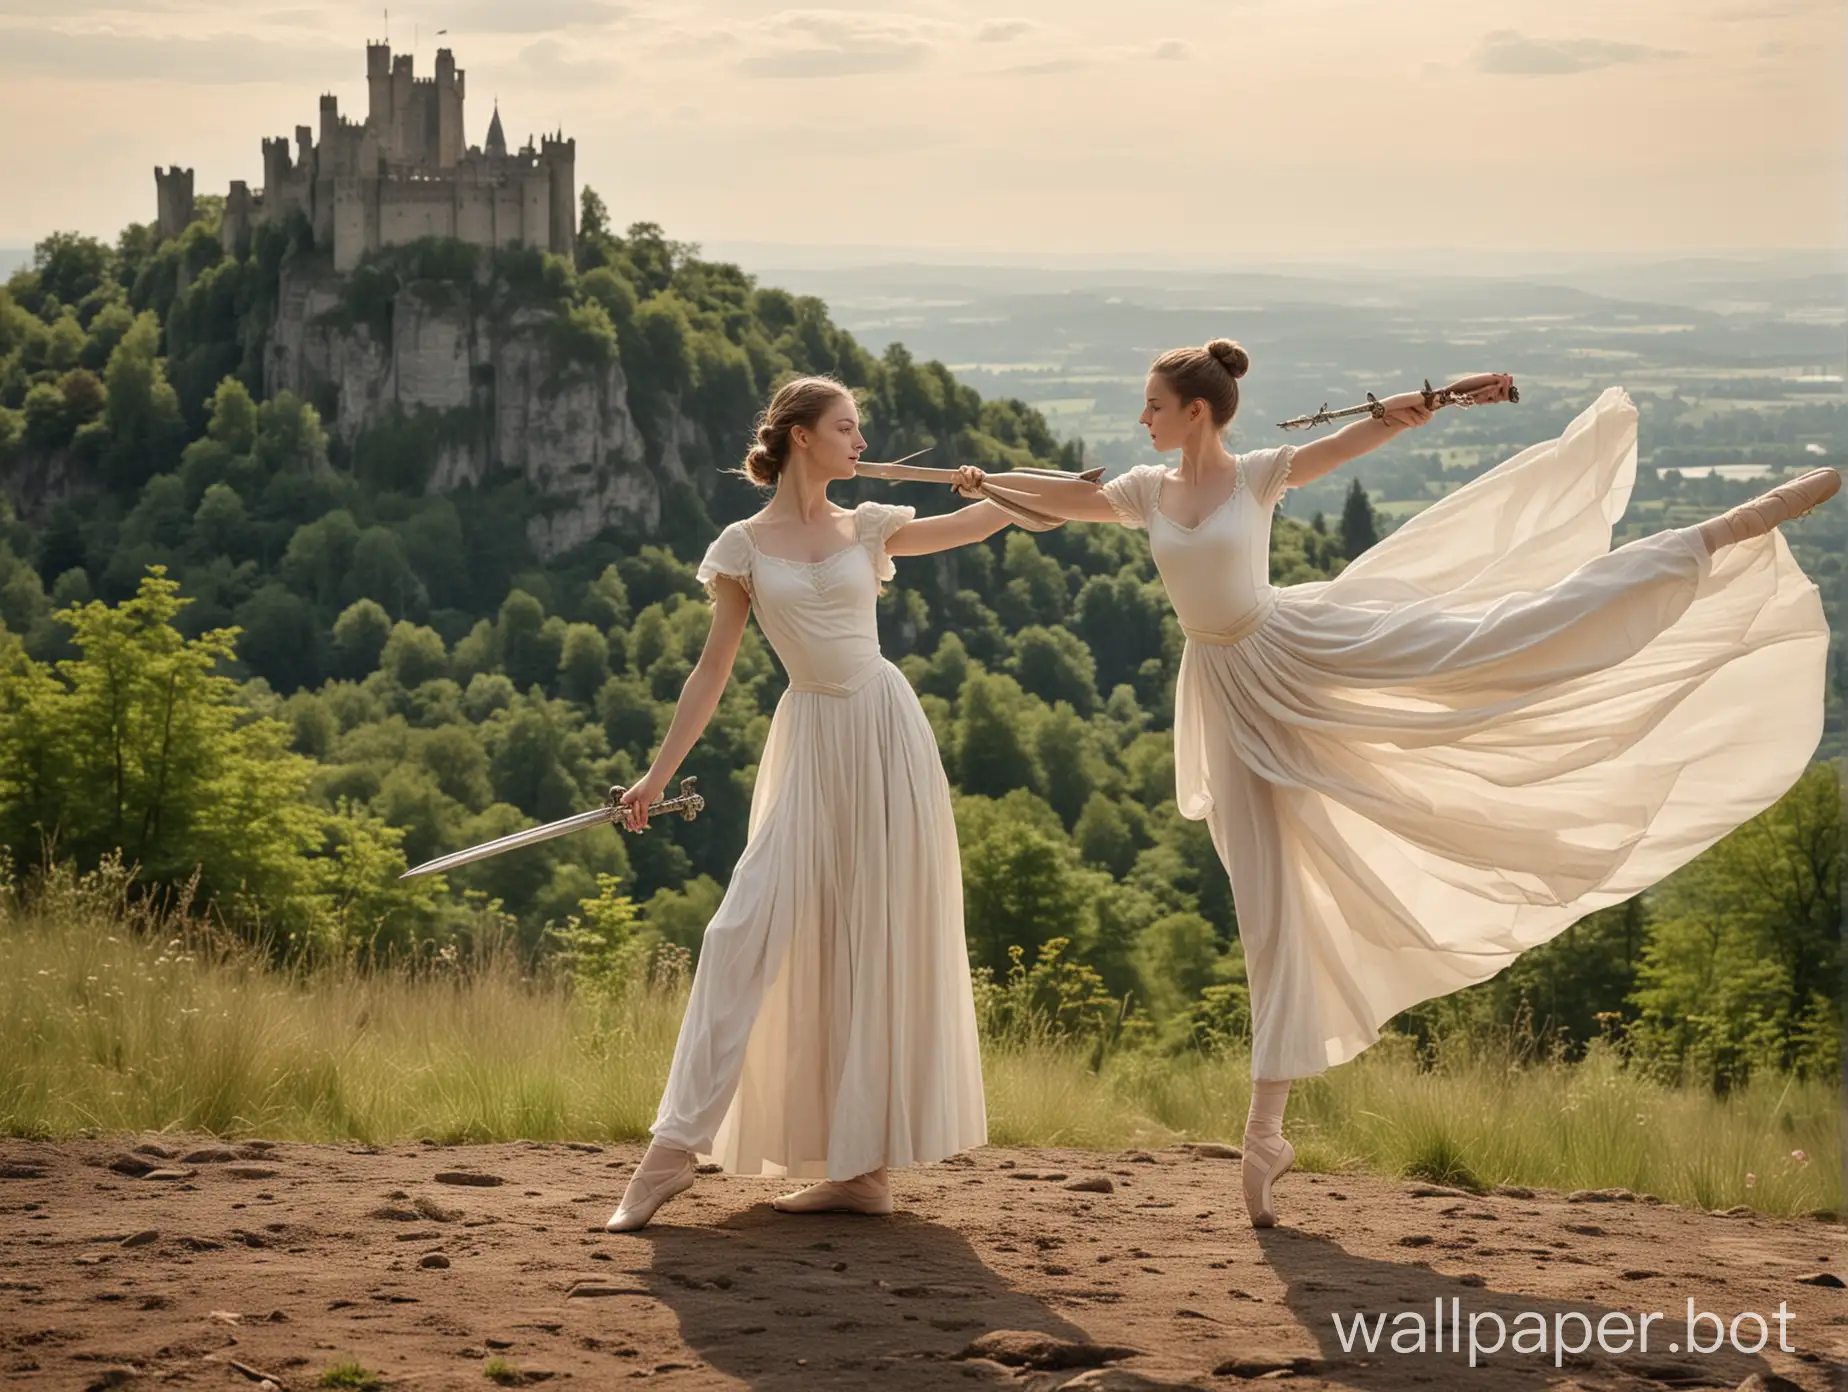 Fantasy-Warrior-Woman-and-Apprentice-in-Ballet-Attire-with-Castle-Background